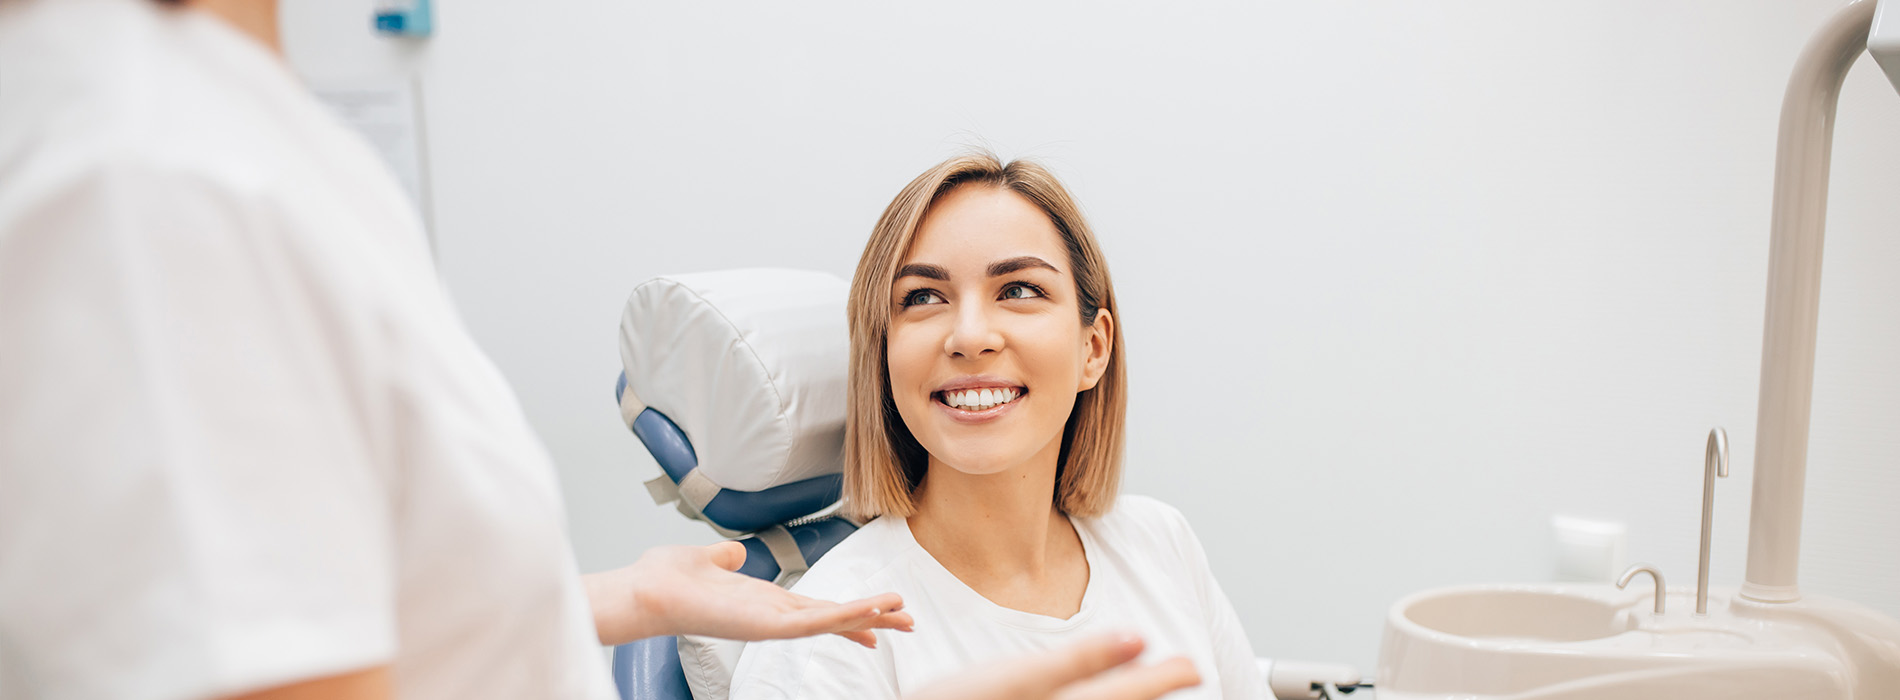 A person is seated in a dental chair, receiving care from a dental professional who stands behind them.